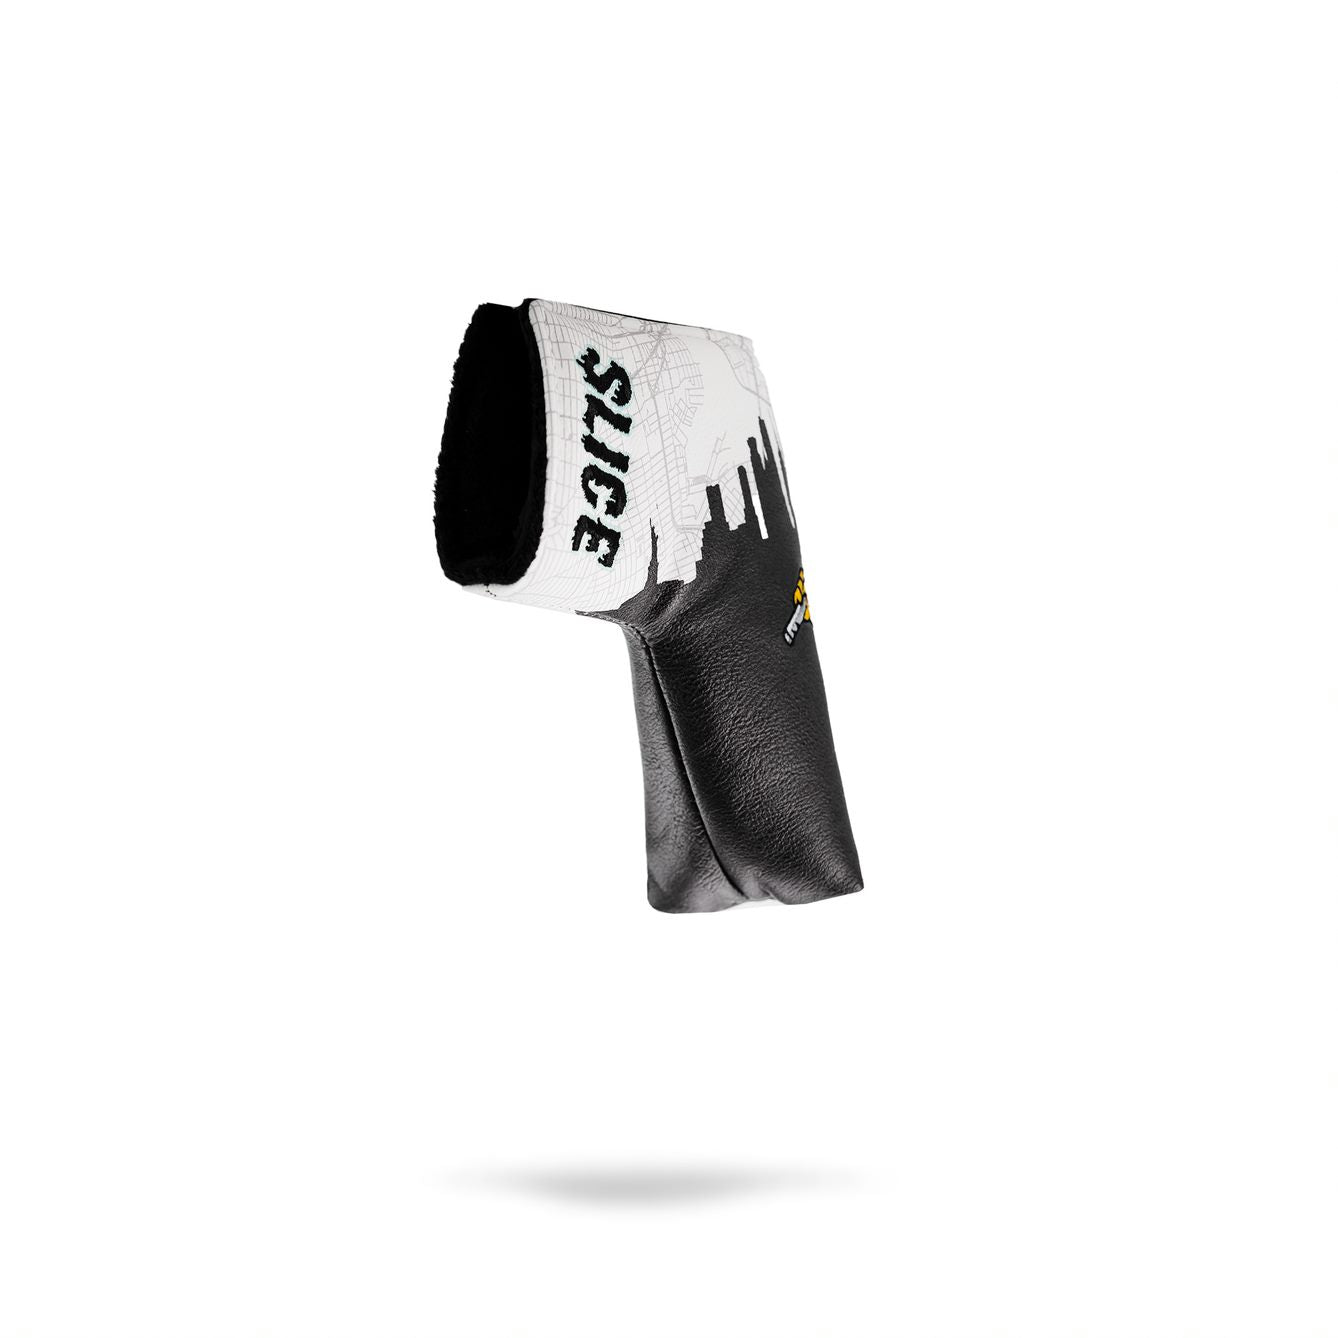 Shady Slice Blade Putter Cover